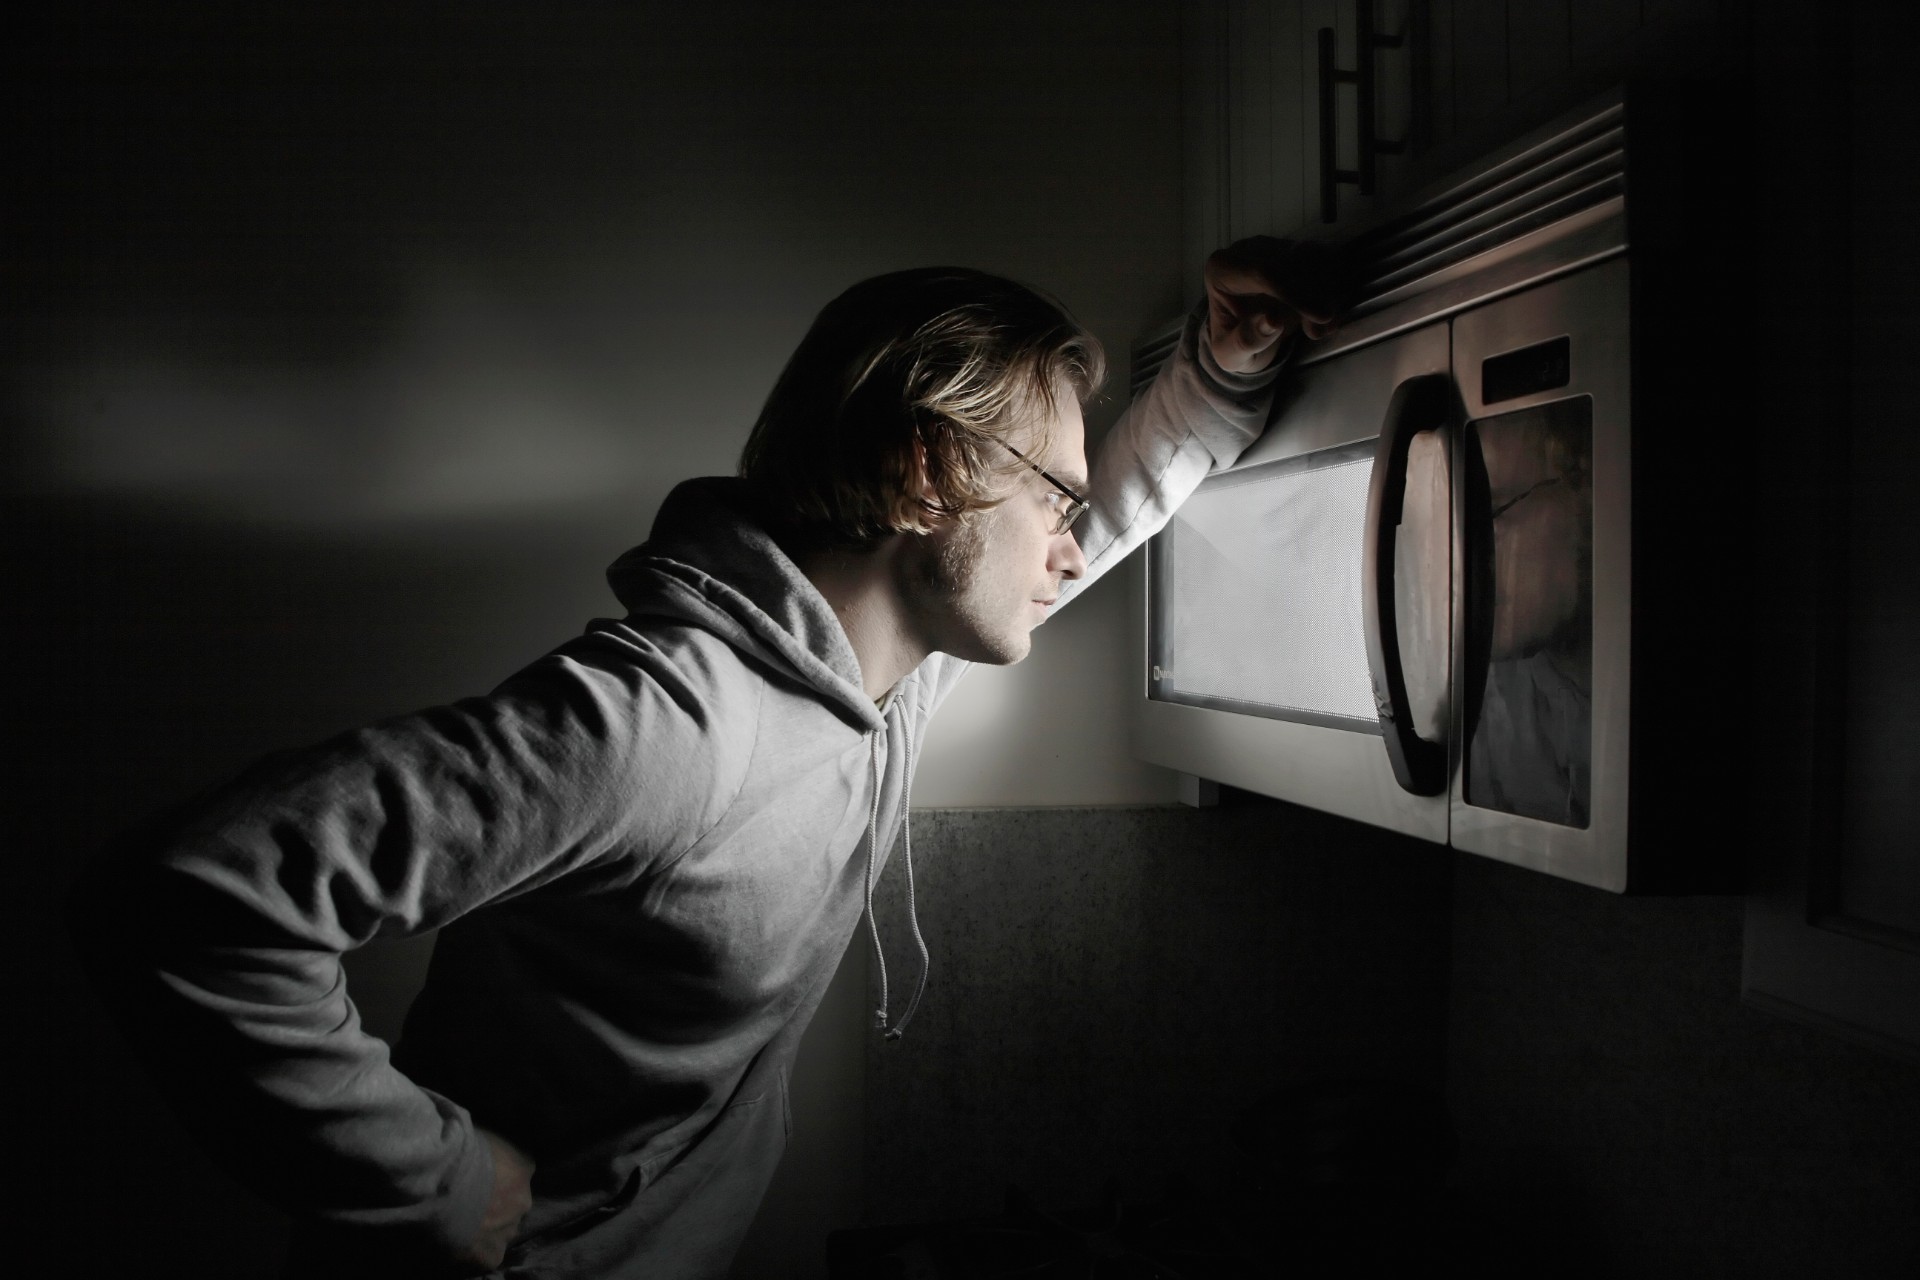 Man looking into microwave oven